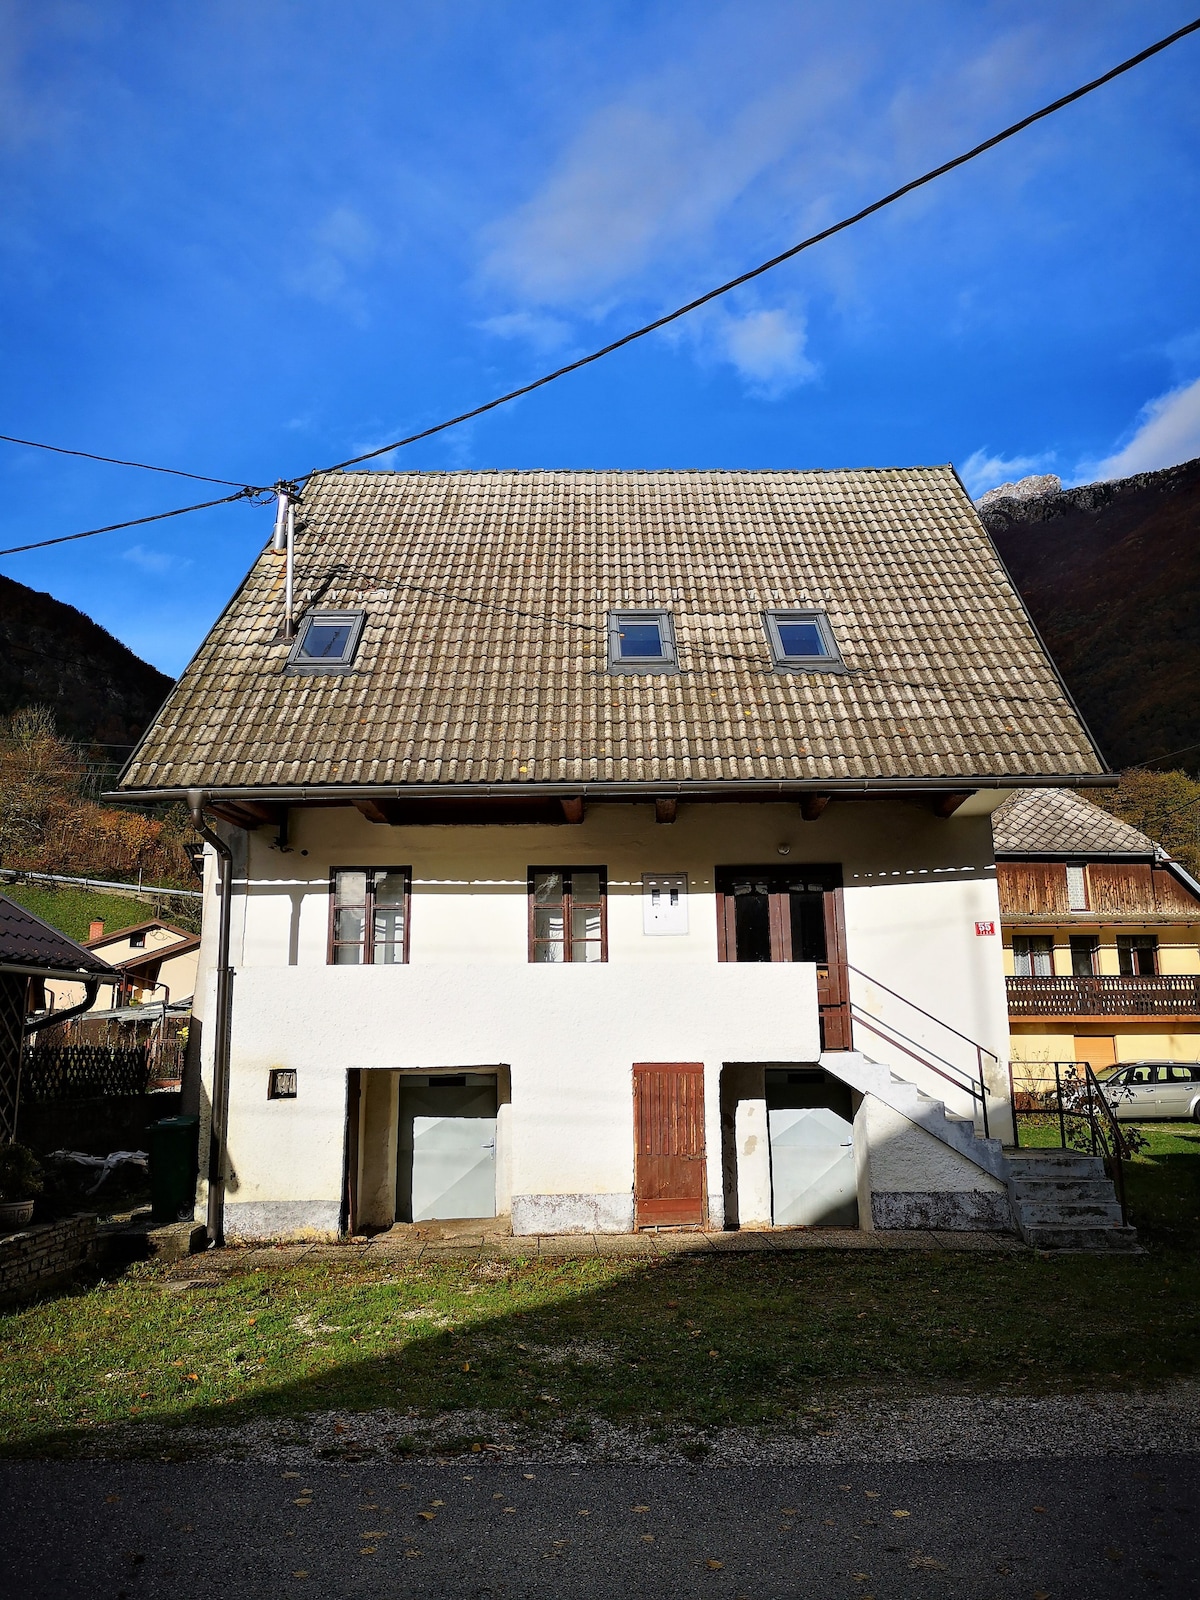 Chalet Zaga, in the heart of village life.